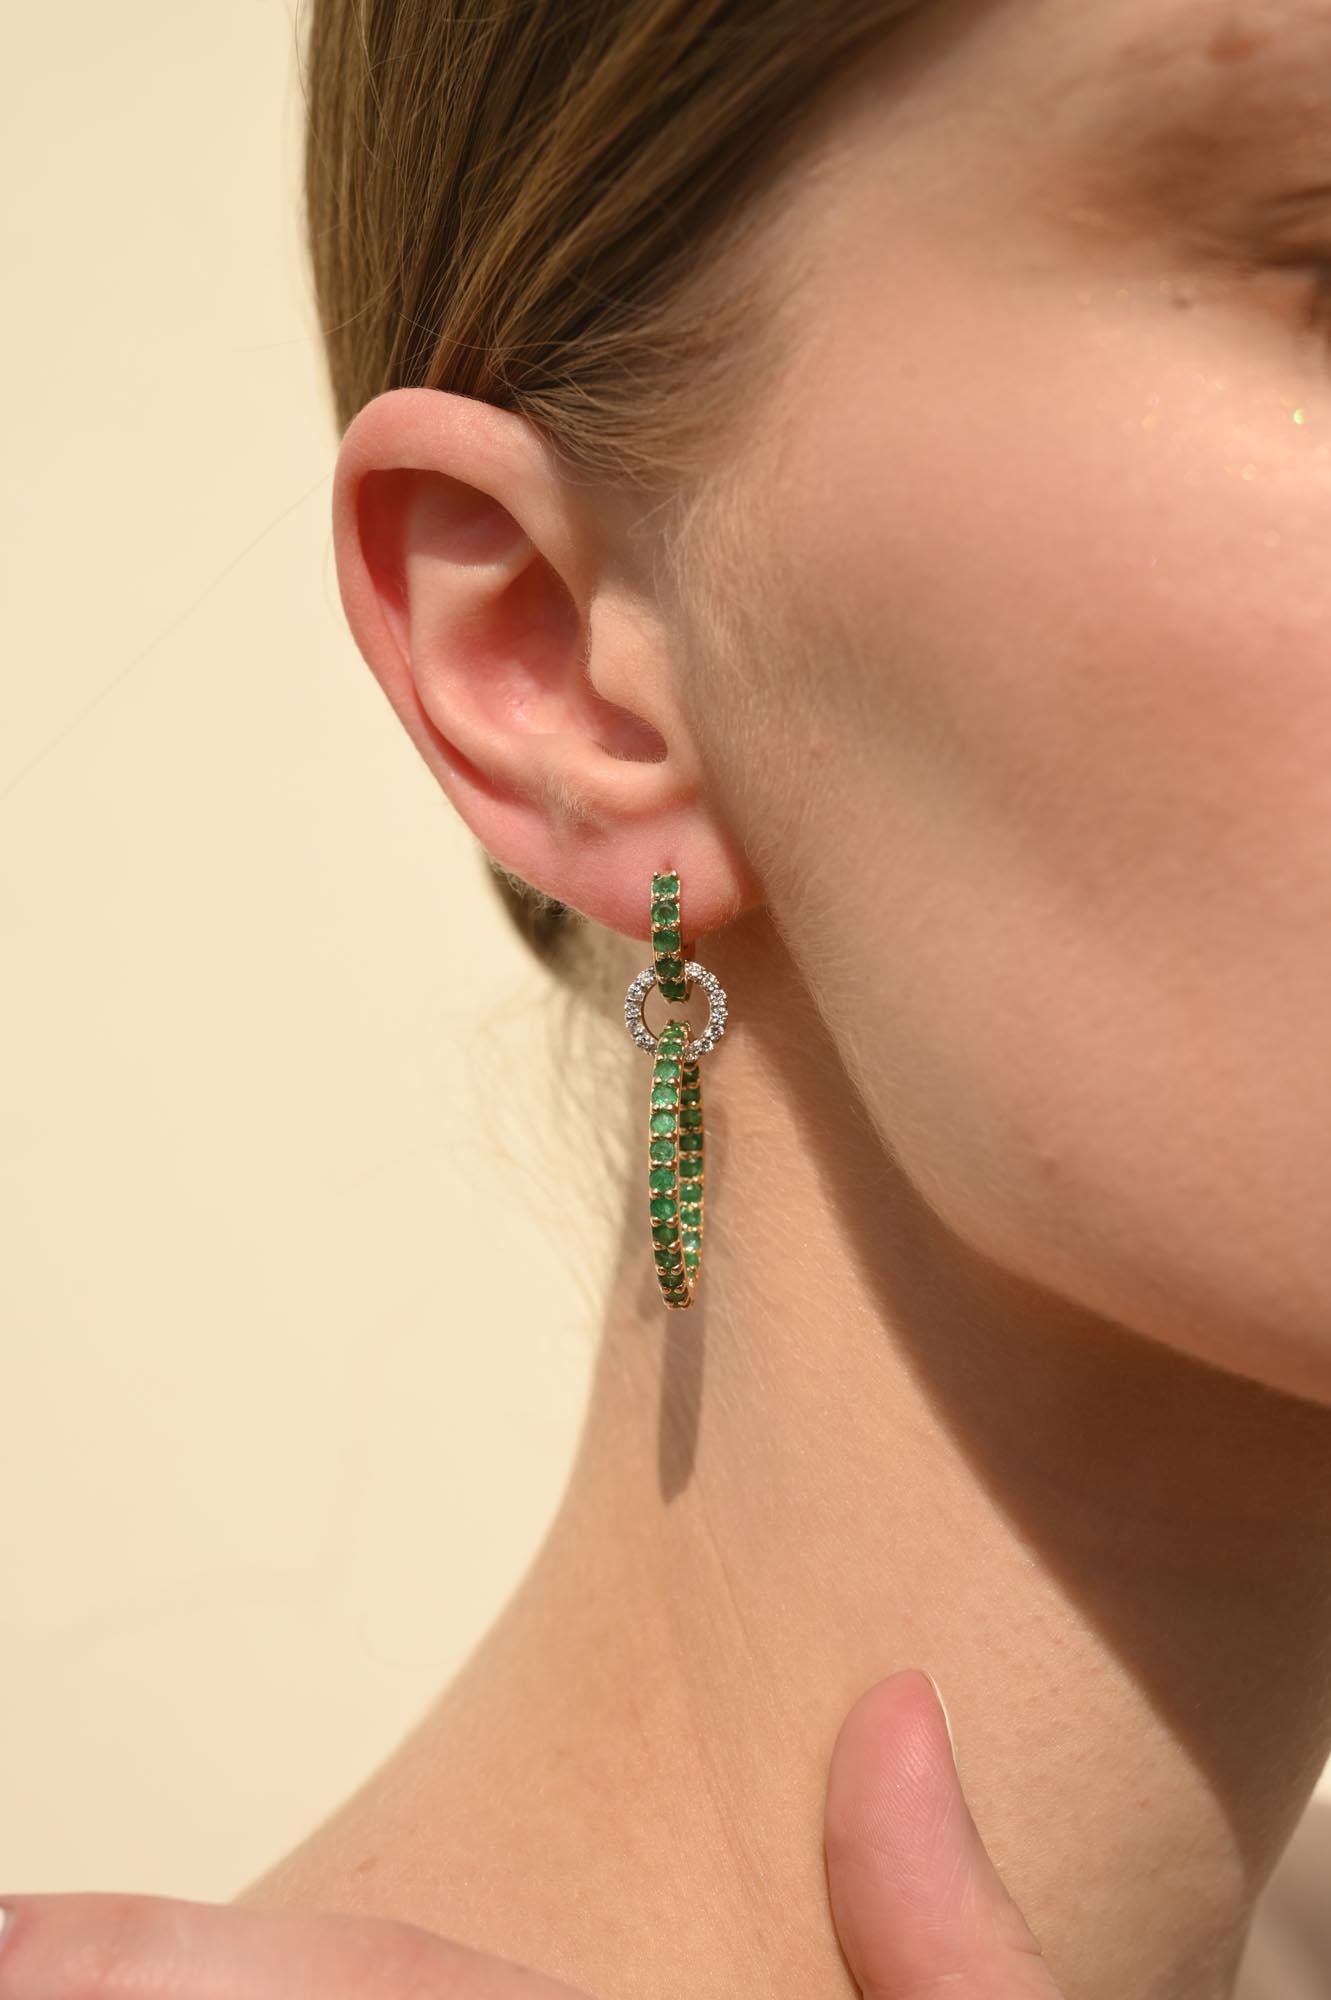 Emerald Rings Dangling Earrings in 14K Gold with Diamonds is beautifully handcrafted with love just for you. These earrings create a sparkling, luxurious look featuring 3.85 carats of round cut emerald and 0.48 carats of diamond. Pair the earrings